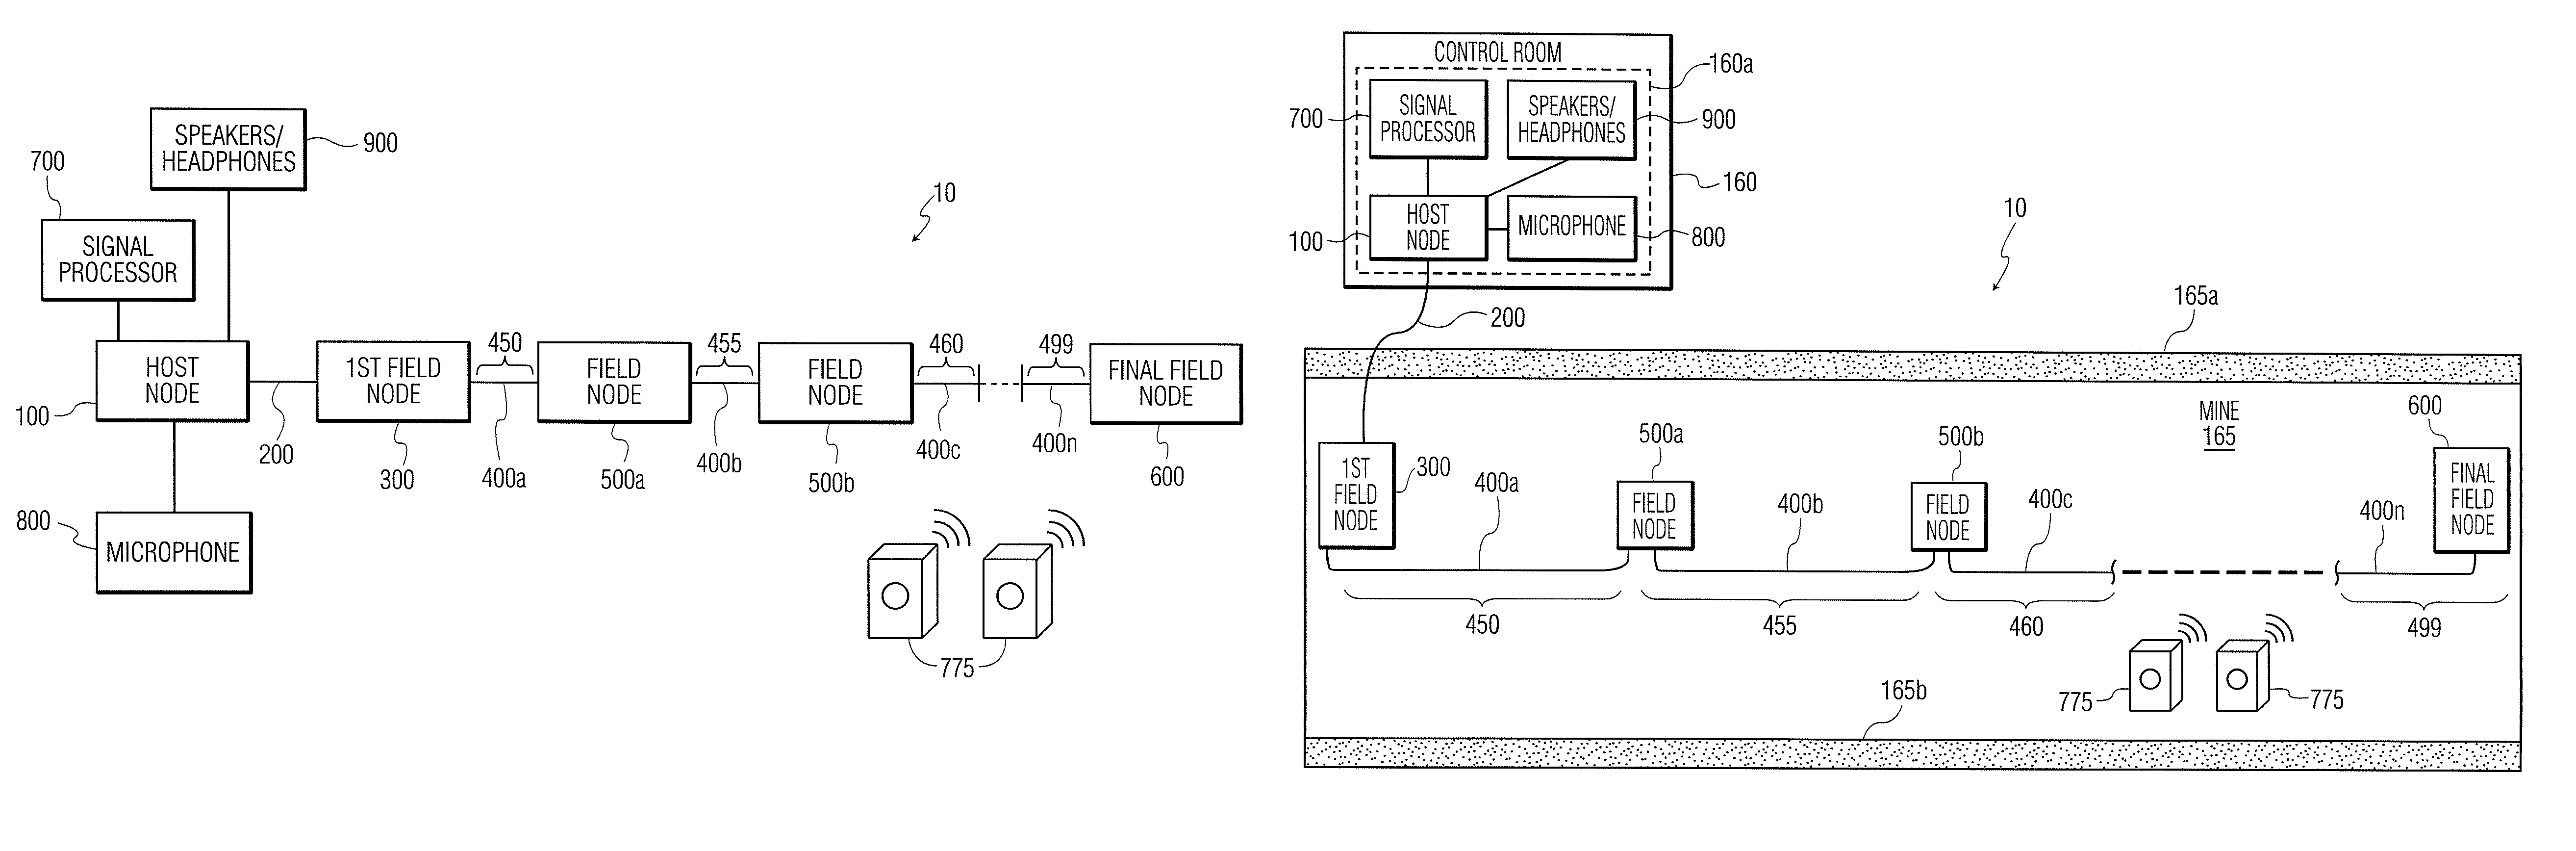 Fiber optic personnel safety systems and methods of using the same